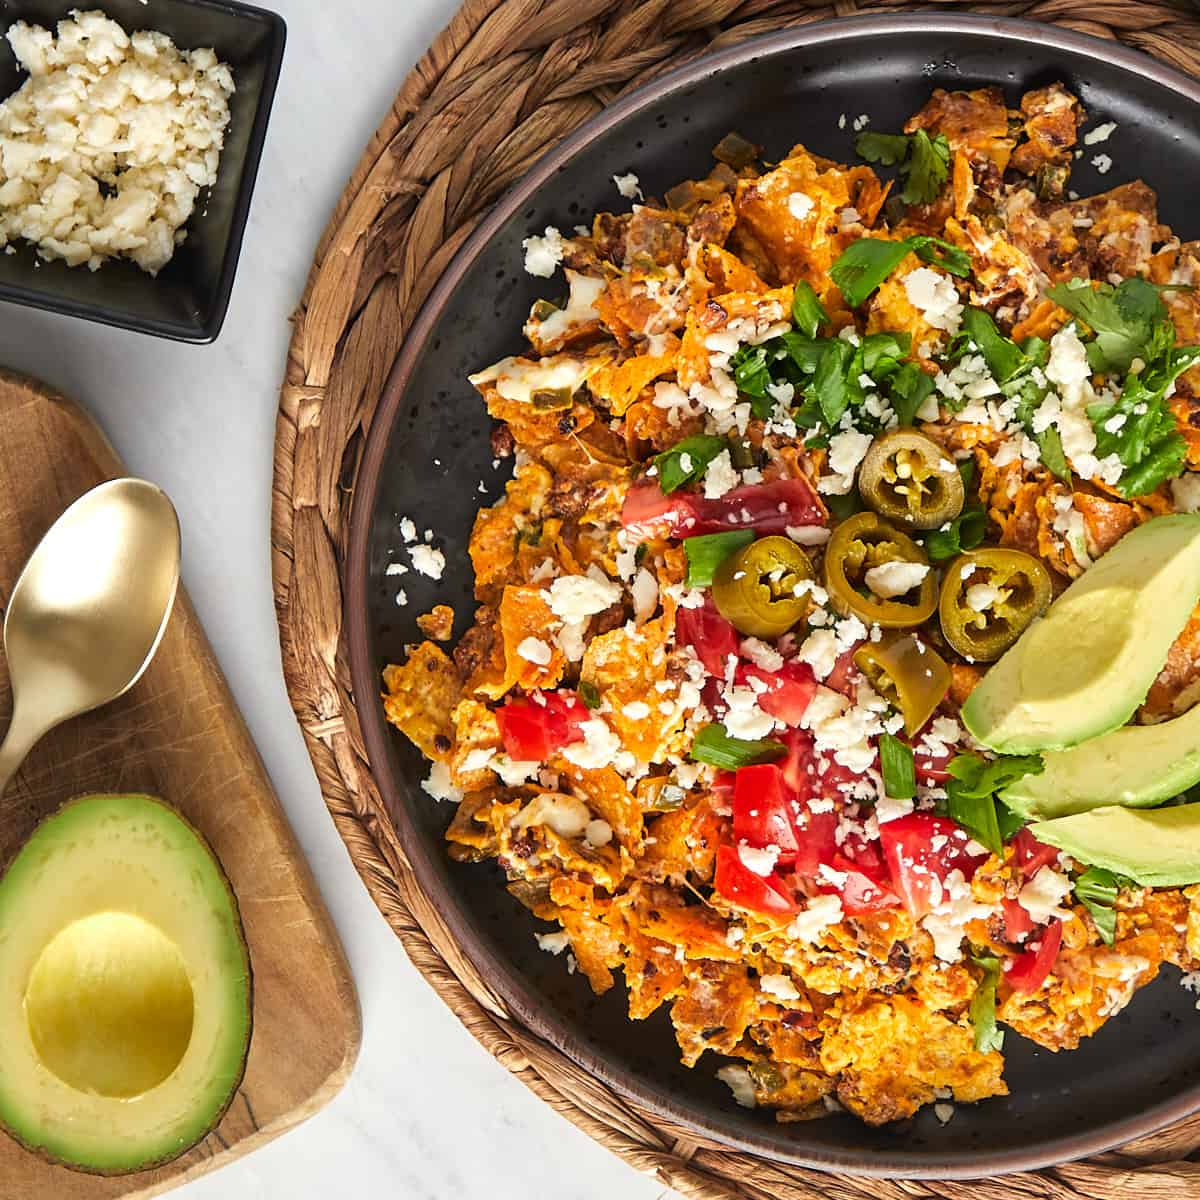 Tex Mex migas with chips tomatoes, jalapenos, cotija, and avocado slices on a plate.